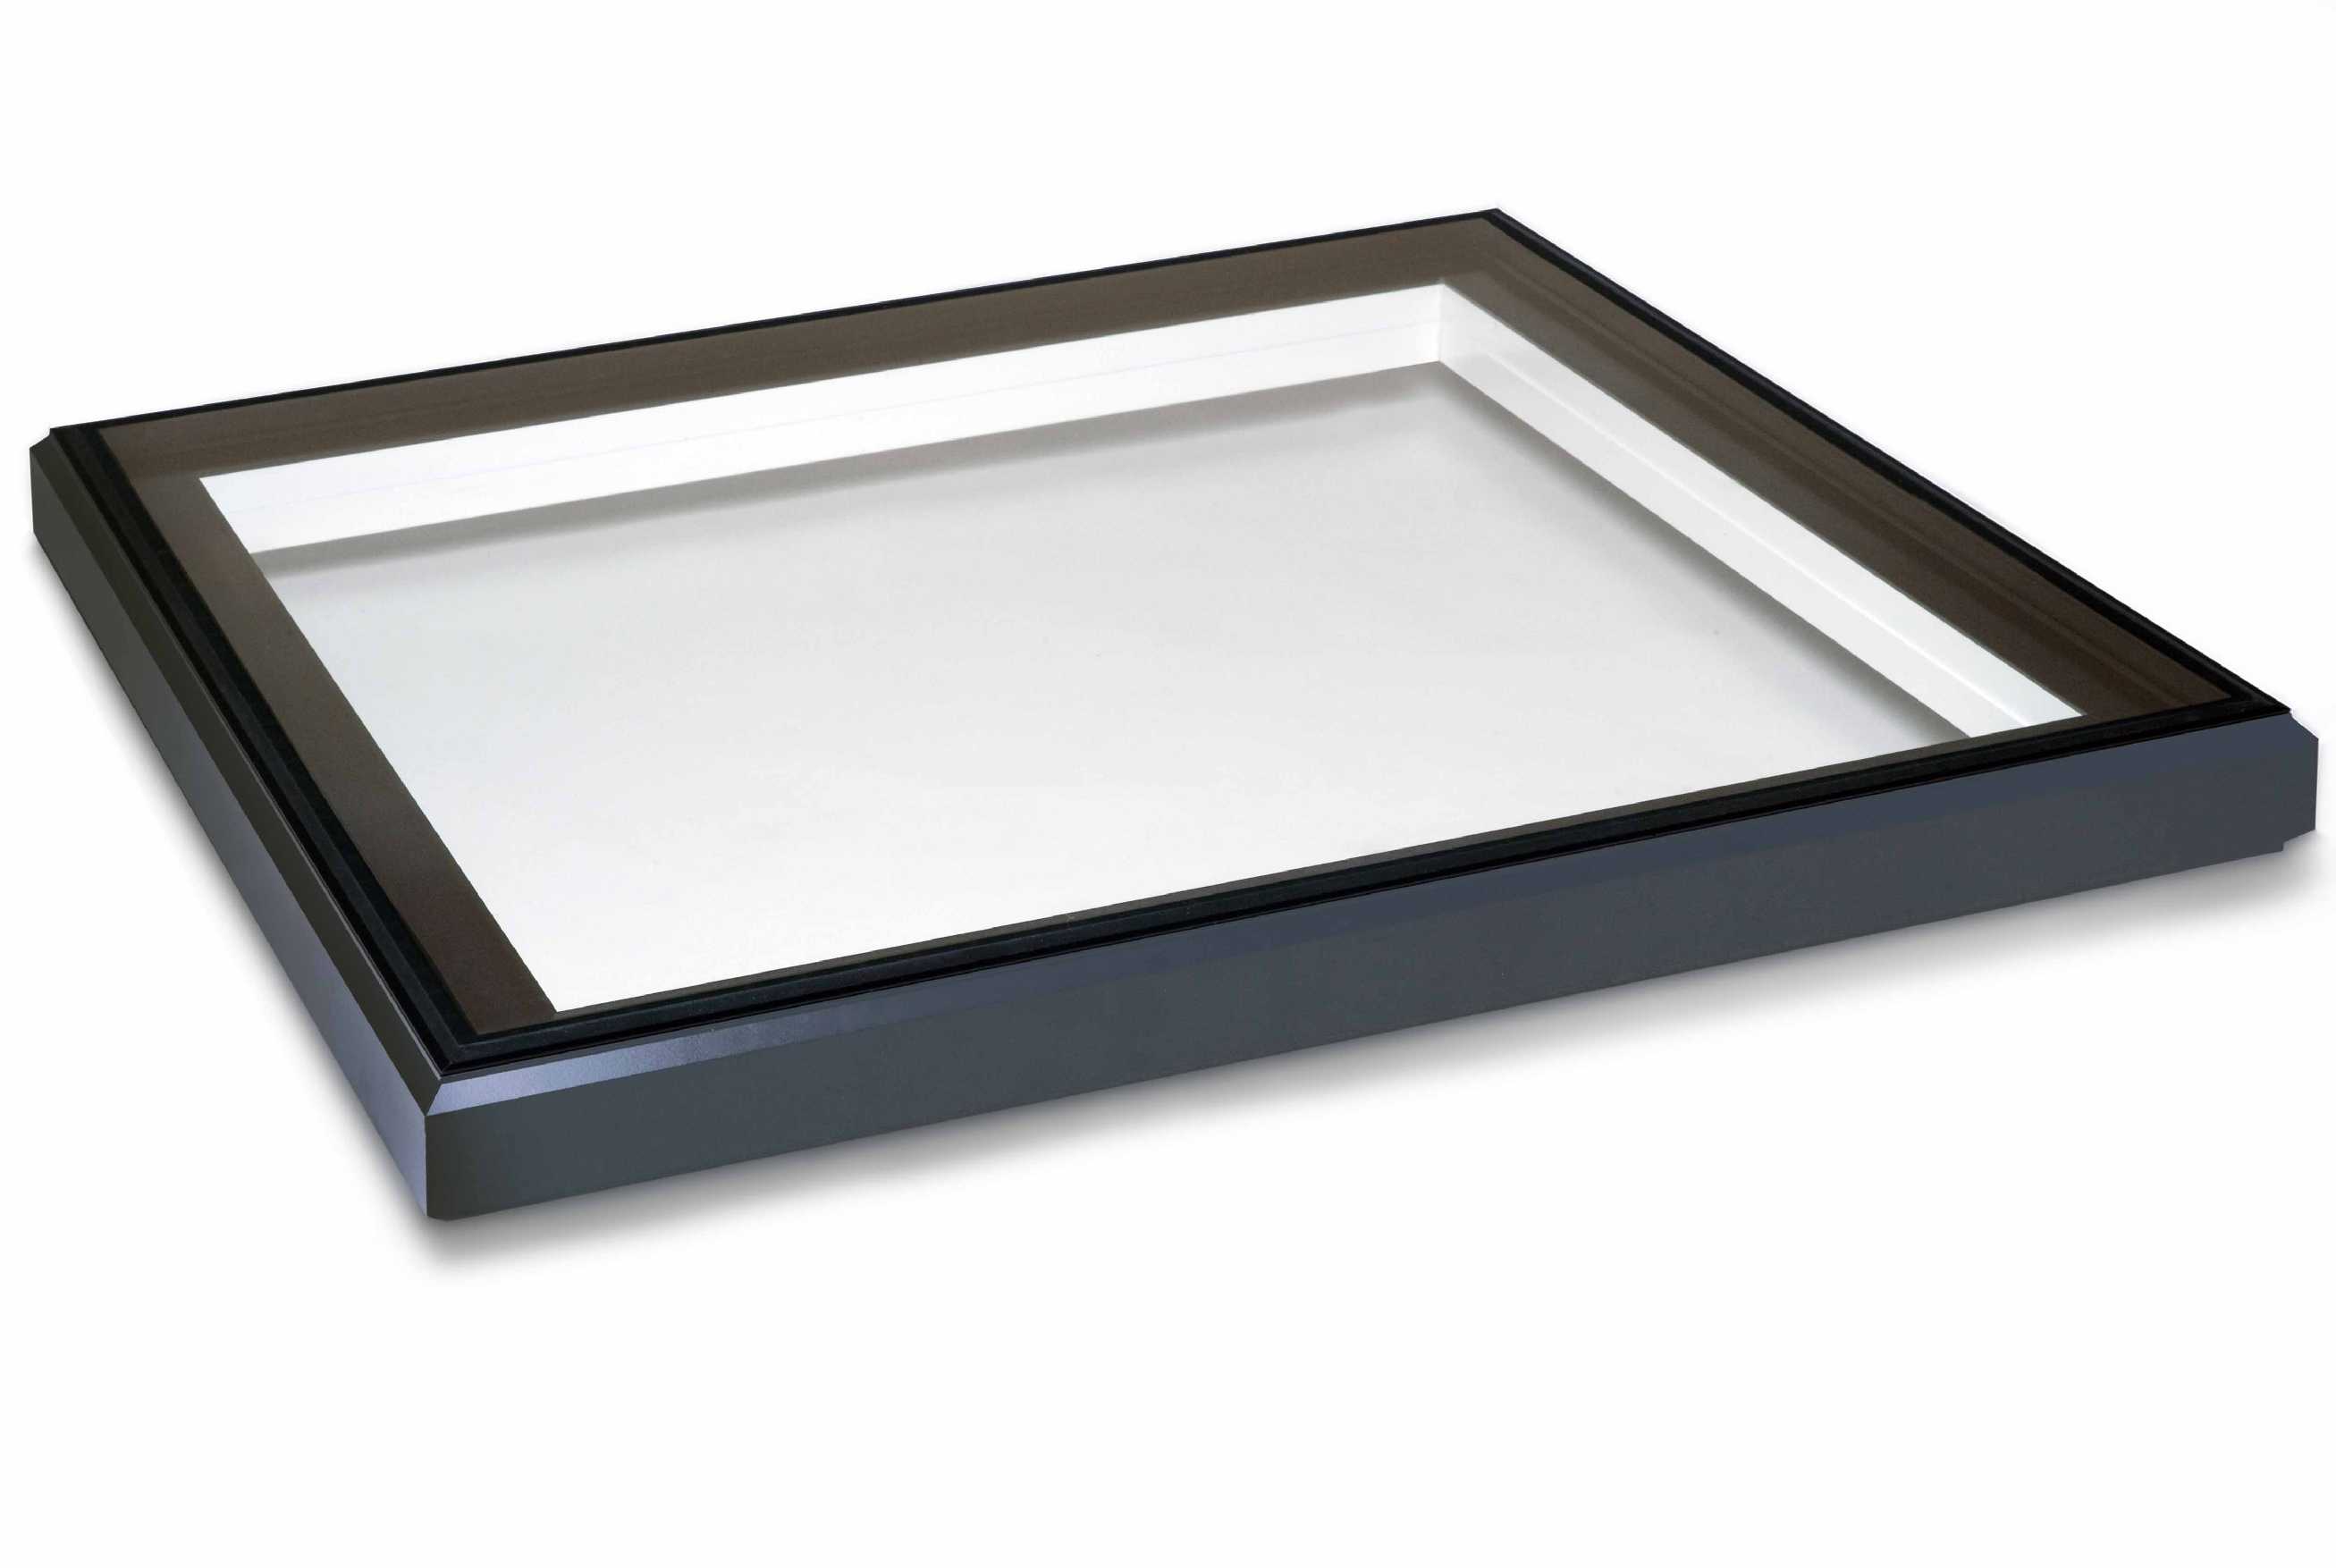 Buy EcoGard Flat Roof light, Triple Glazed, Electric Opening, 1,000mm x 1,500mm online today